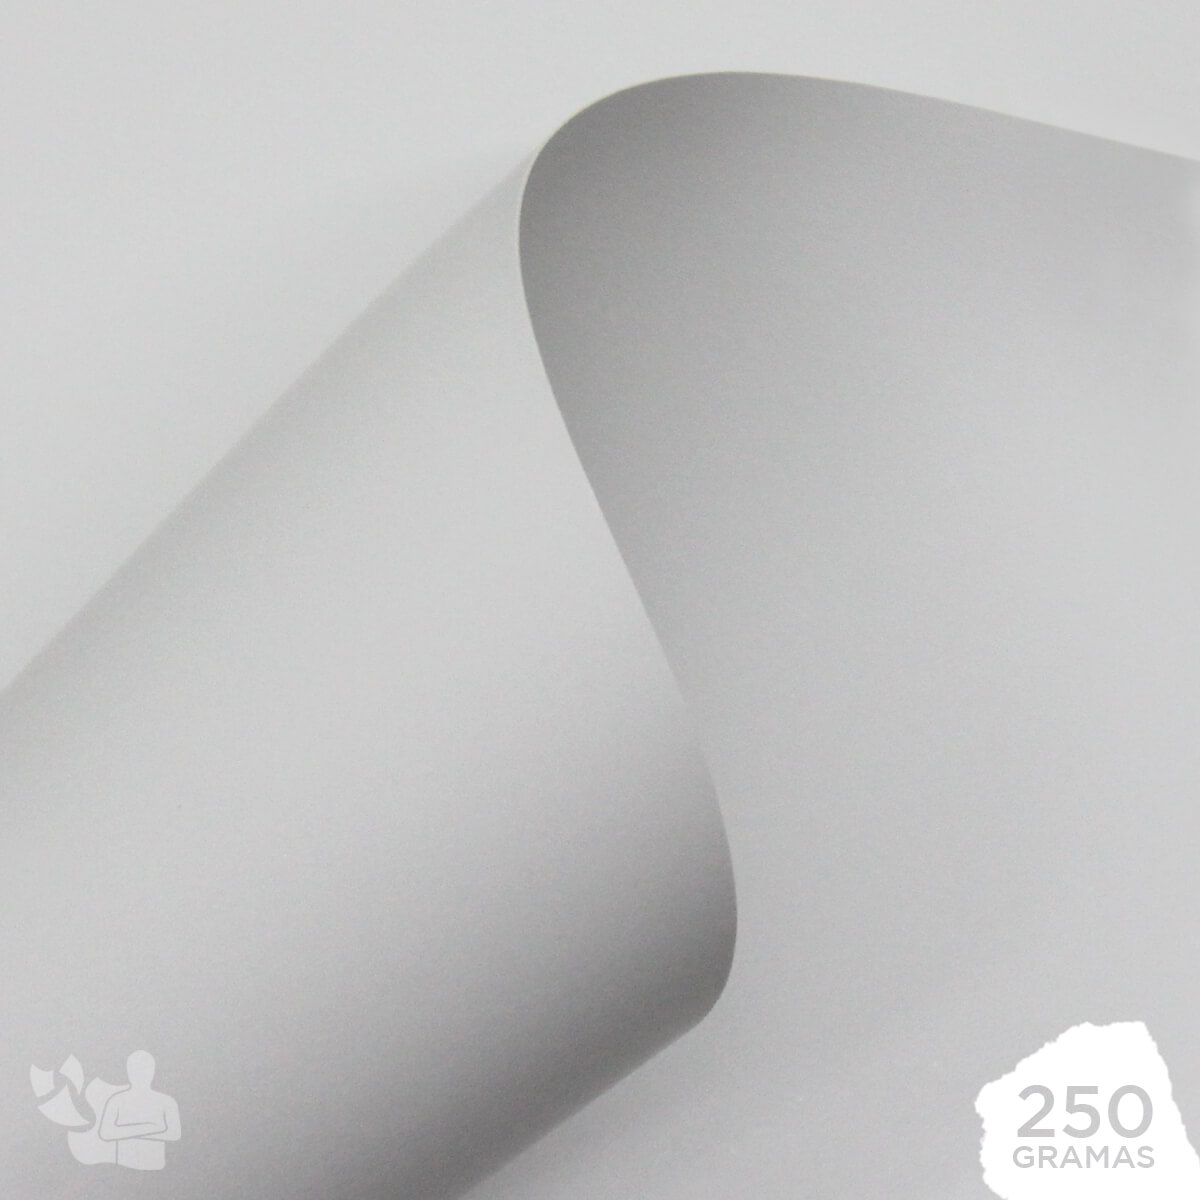 Papel Fotográfico - Laser - Satin - 250g - A4 - SupperPapel | 9 anos!